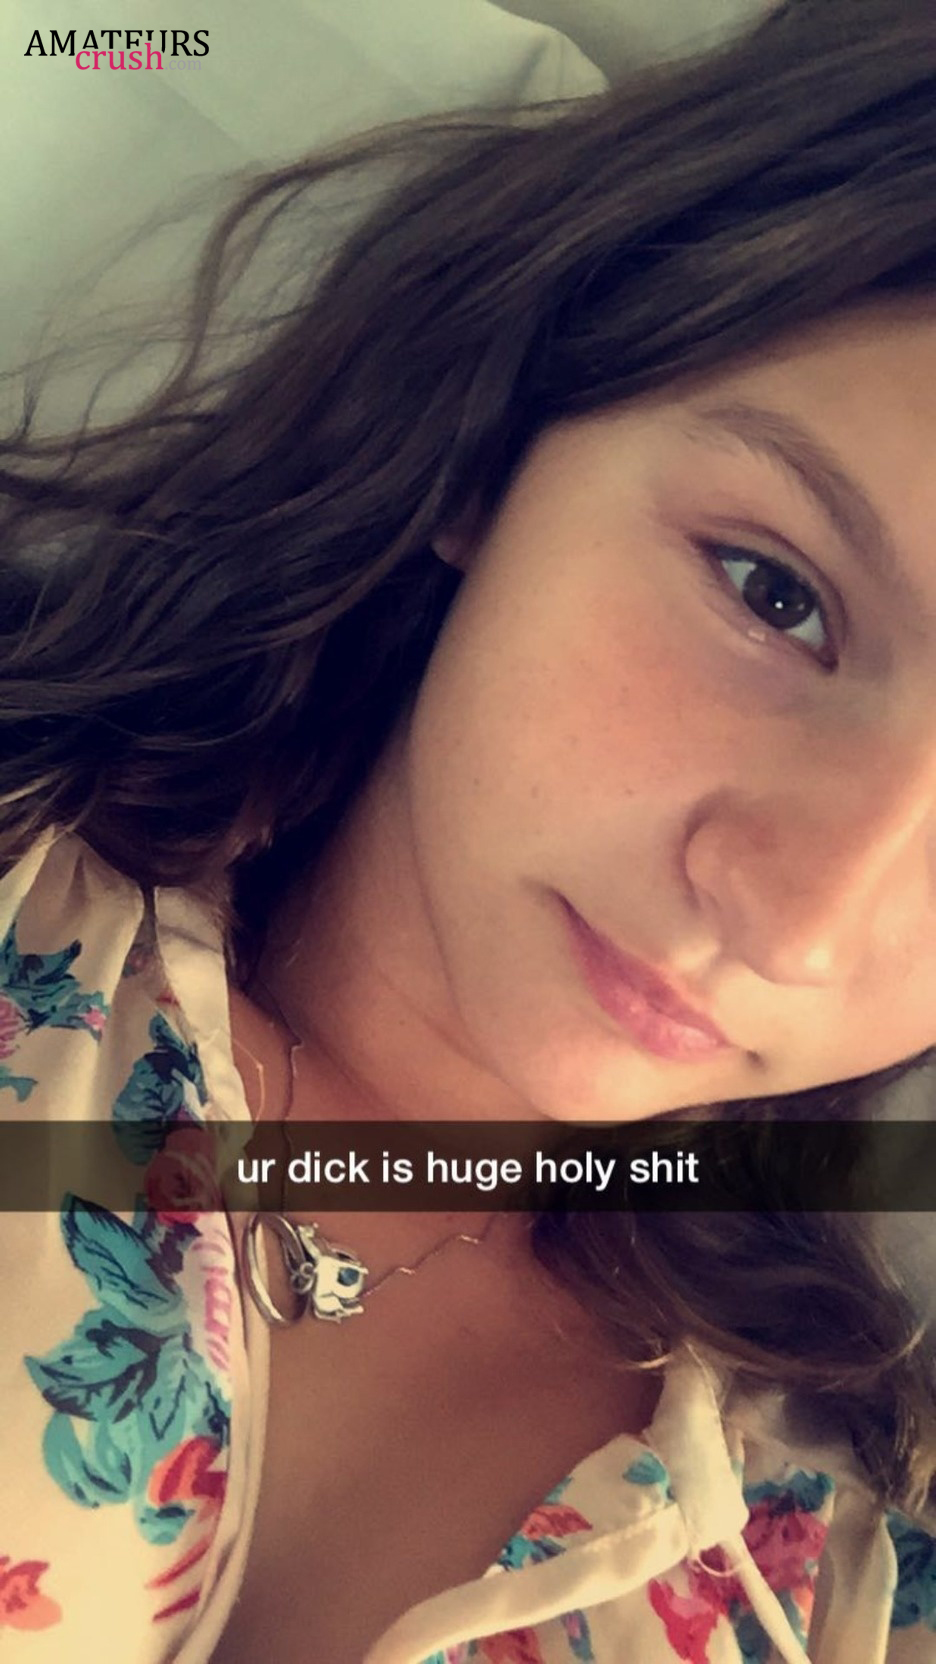 Girl Sucking Big Dick Selfie - Snapchat Leaked - 36 Naughty Snapchat and Video That Got ...